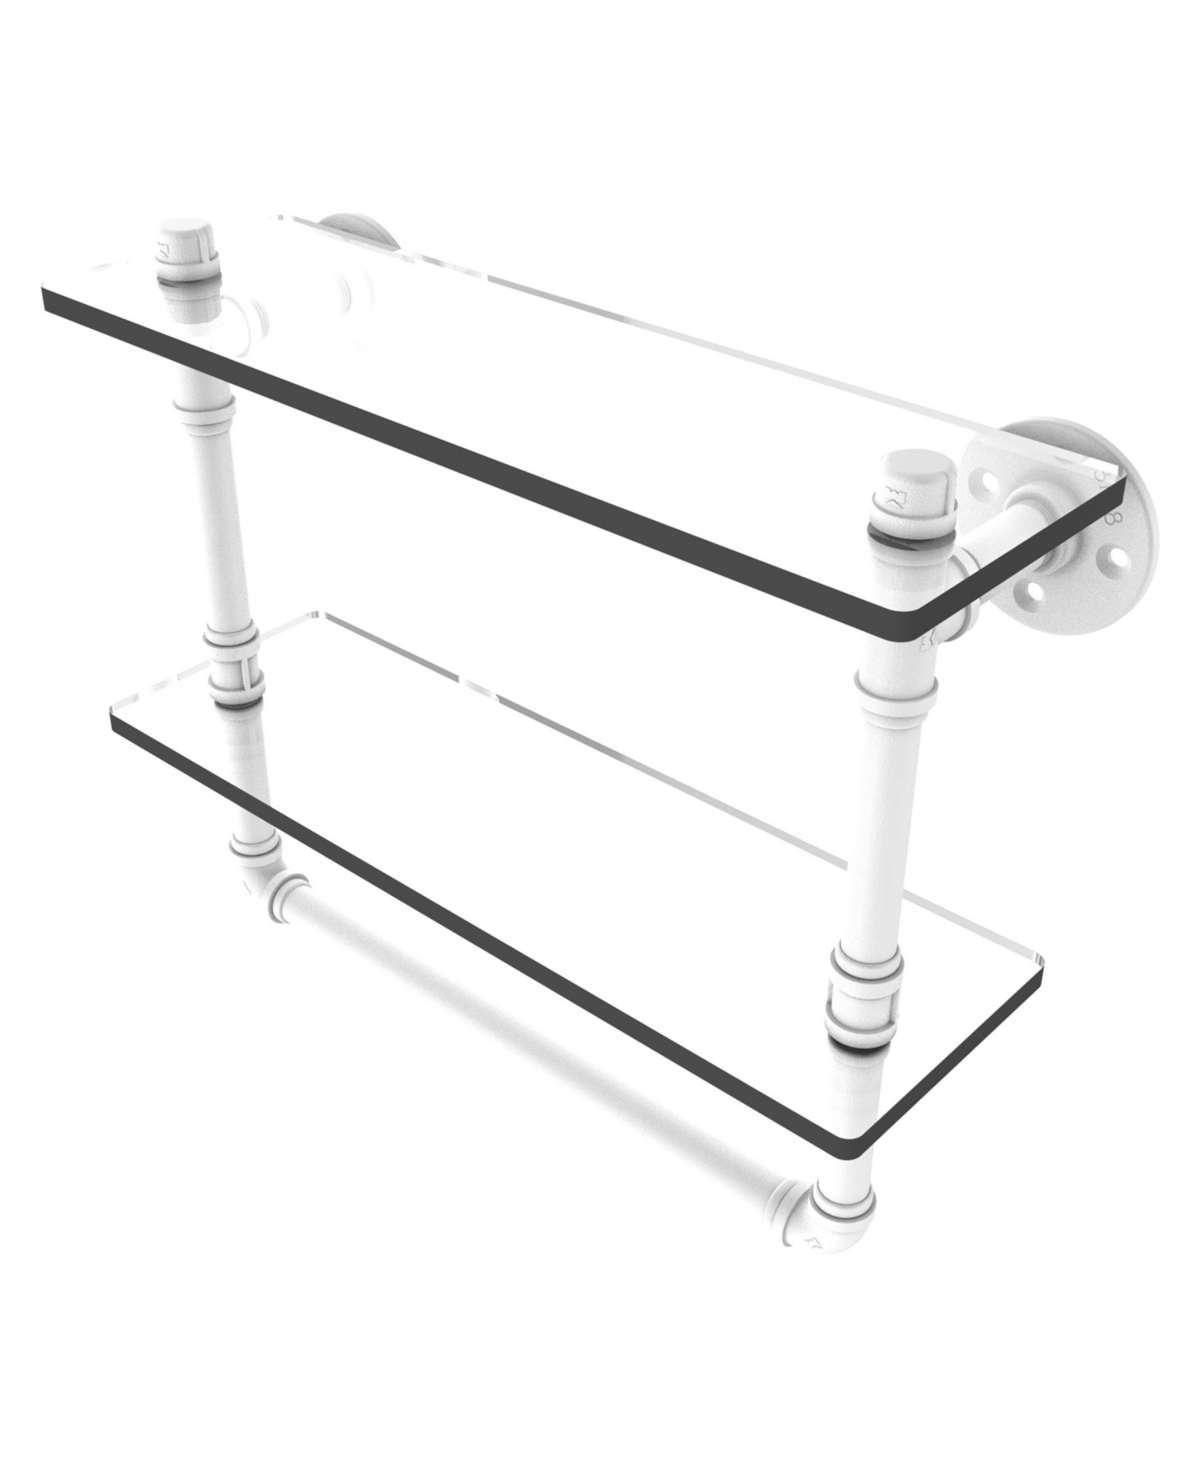 Allied Brass Pipeline Collection 16 Inch Double Glass Shelf With Towel Bar In Satin Nickel